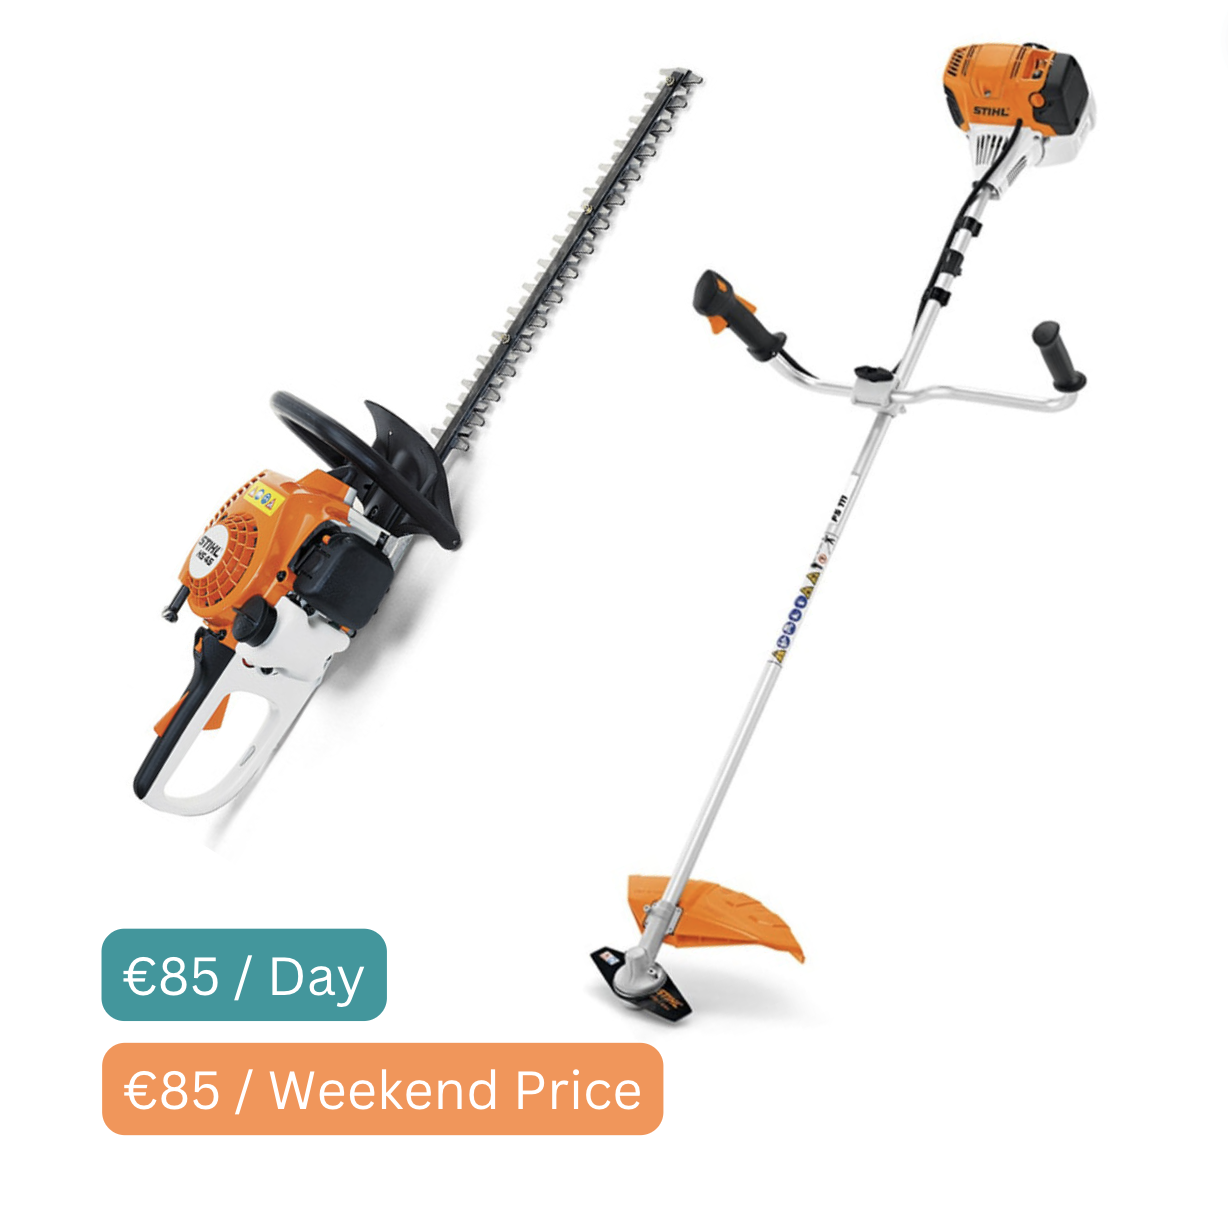 Hedge Trimmer & Weed Eater - Hire Bundle